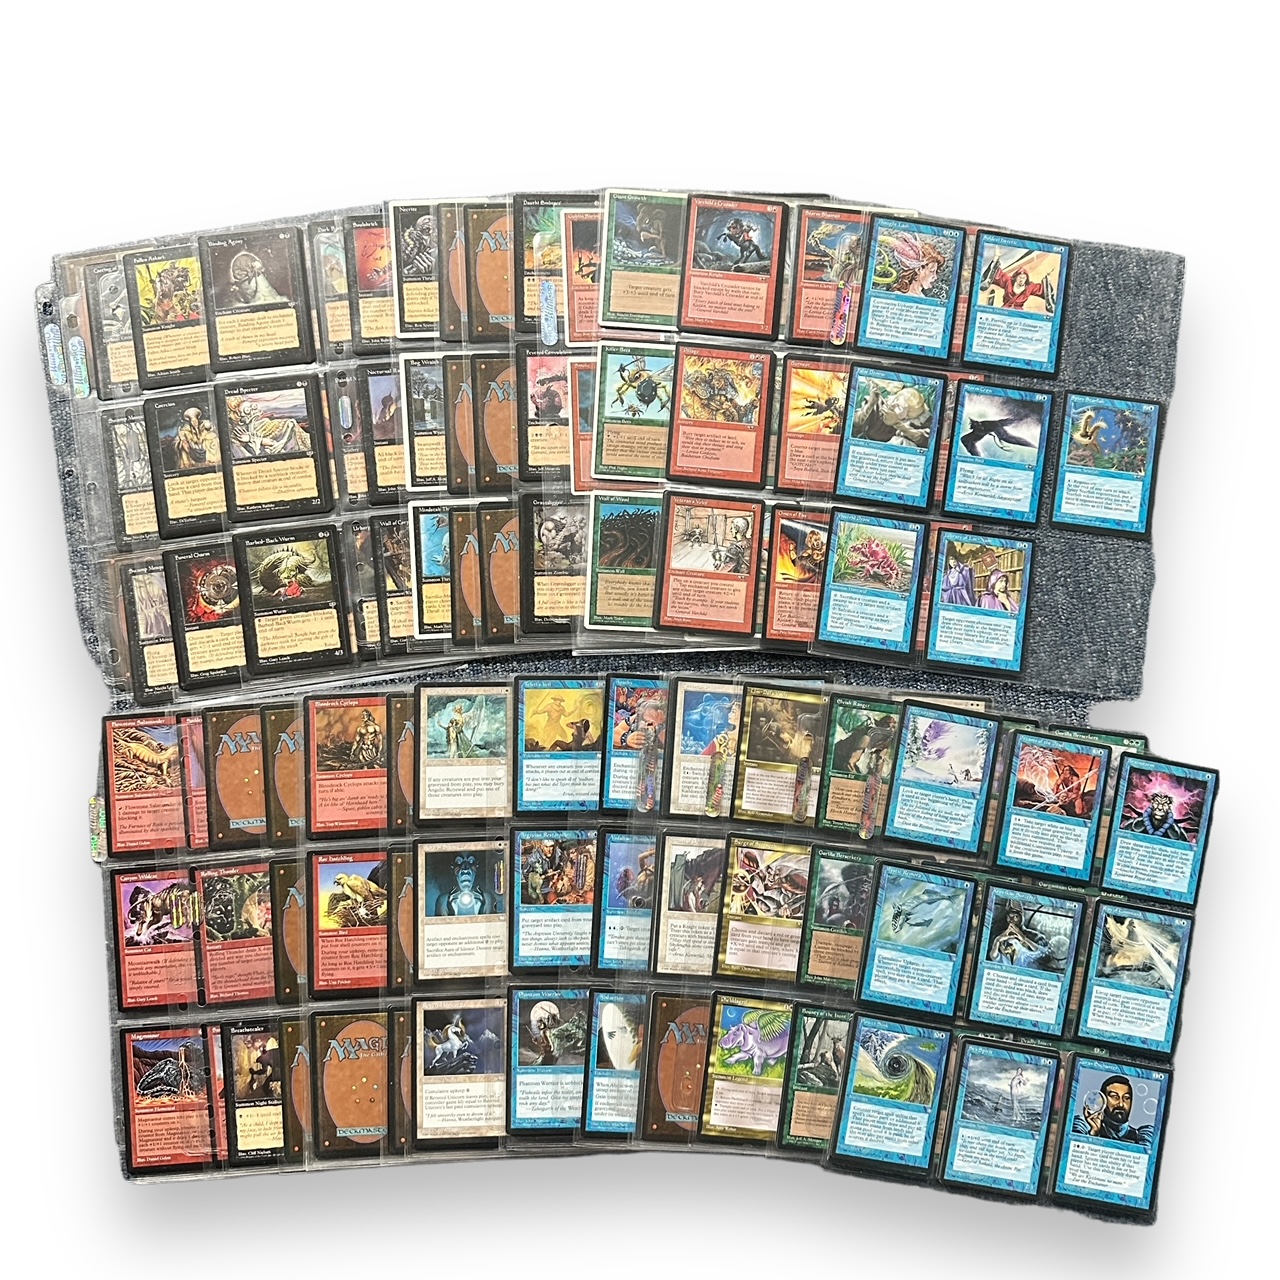 Large Collection of Magic The Gathering Cards from 1990's - 2010's. Rare cards among the collection. - Image 6 of 6